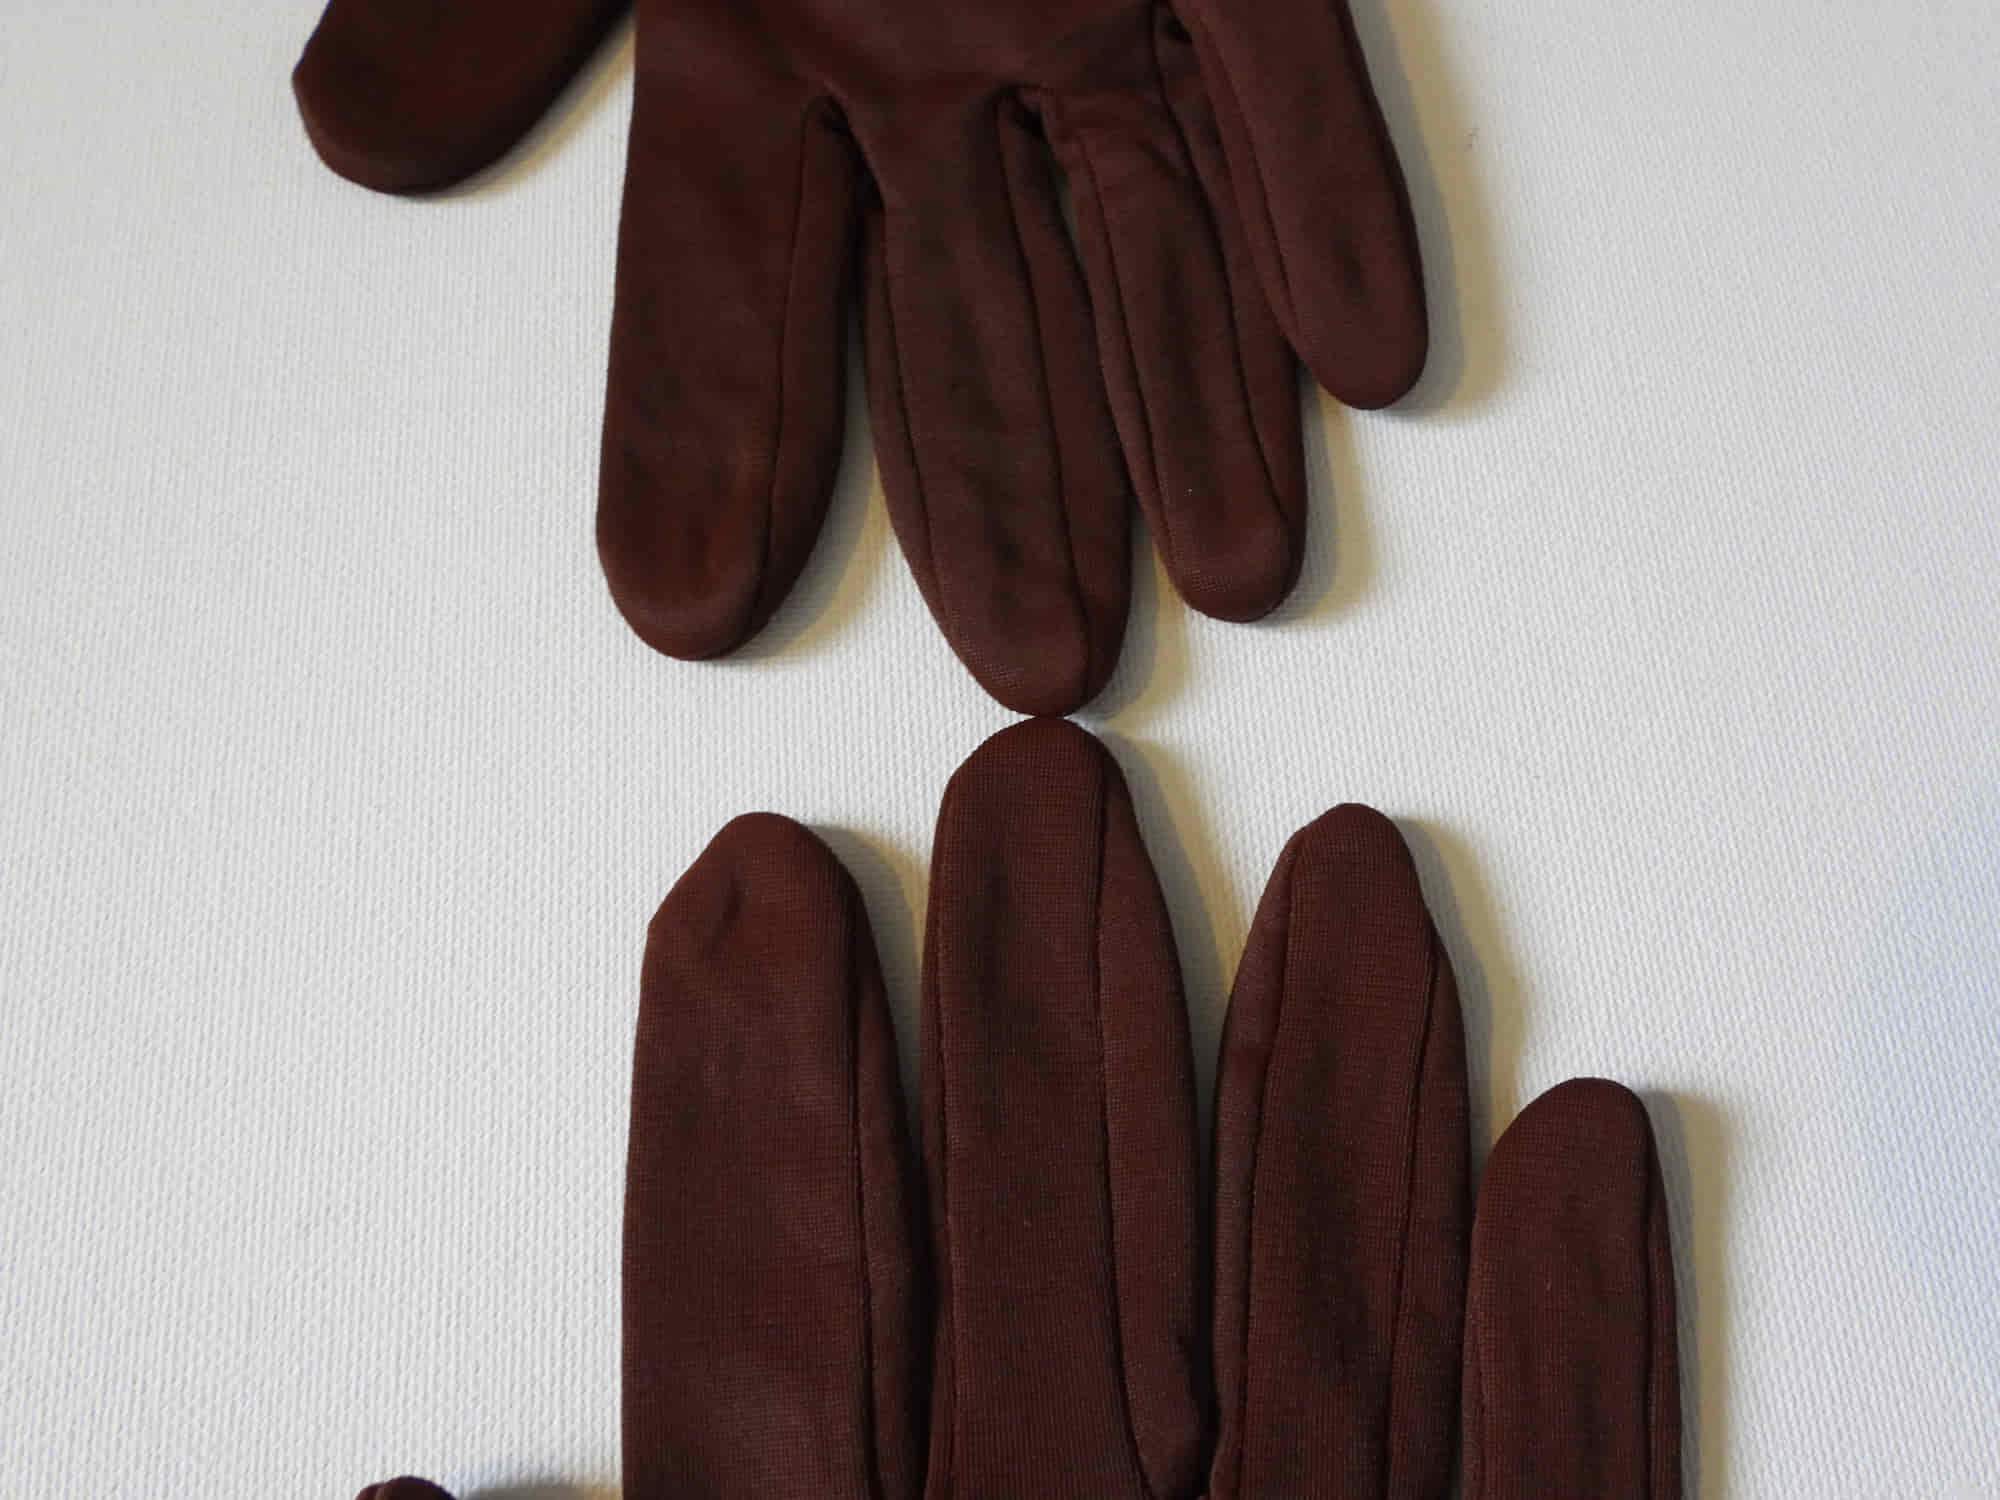 1960s vintage short brown fleecy lined gloves size 7